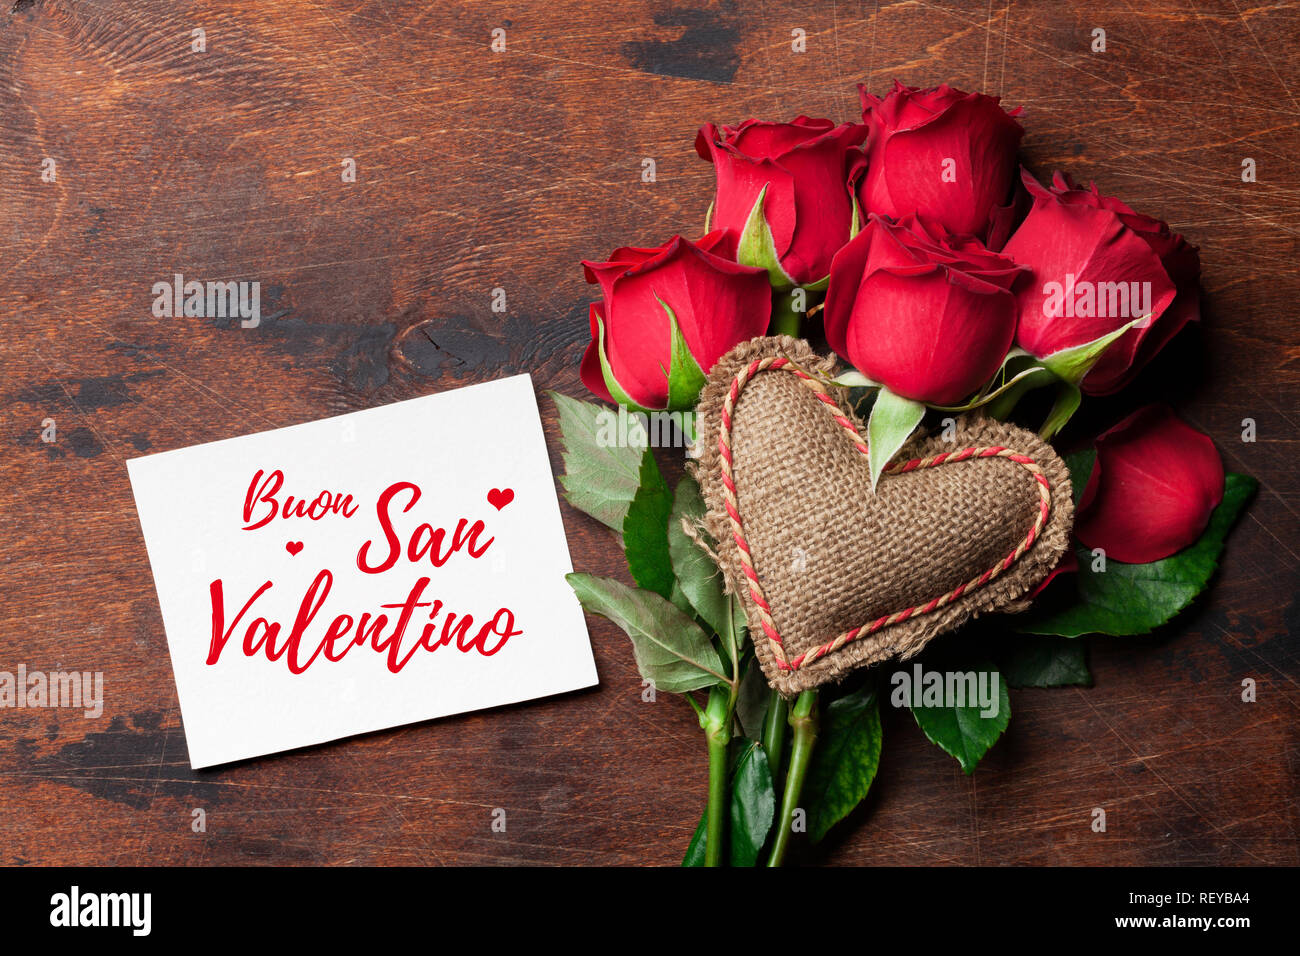 Valentine's day greeting card with red rose flowers bouquet and knitted  heart on wooden background. Boun San Valentino Italy. Top view with space  for Stock Photo - Alamy